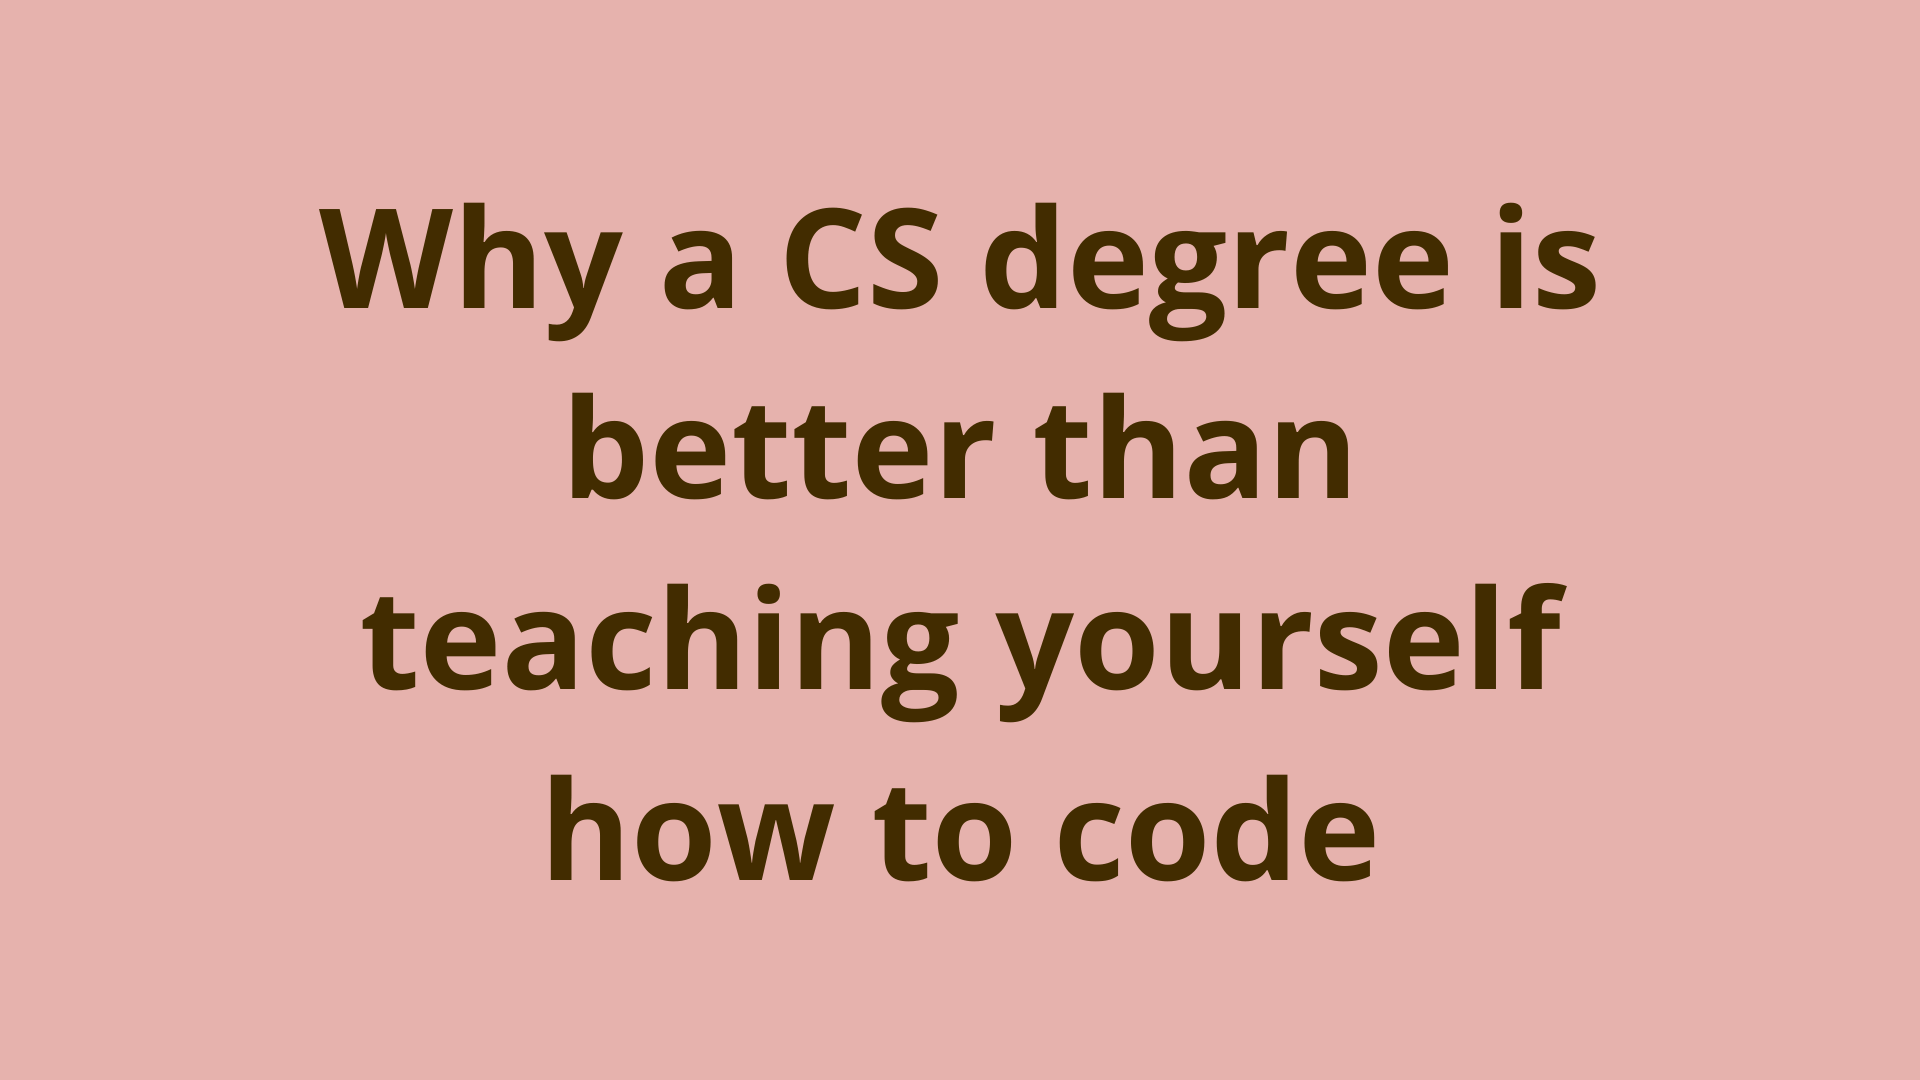 Image of Why a CS degree is better than teaching yourself how to code